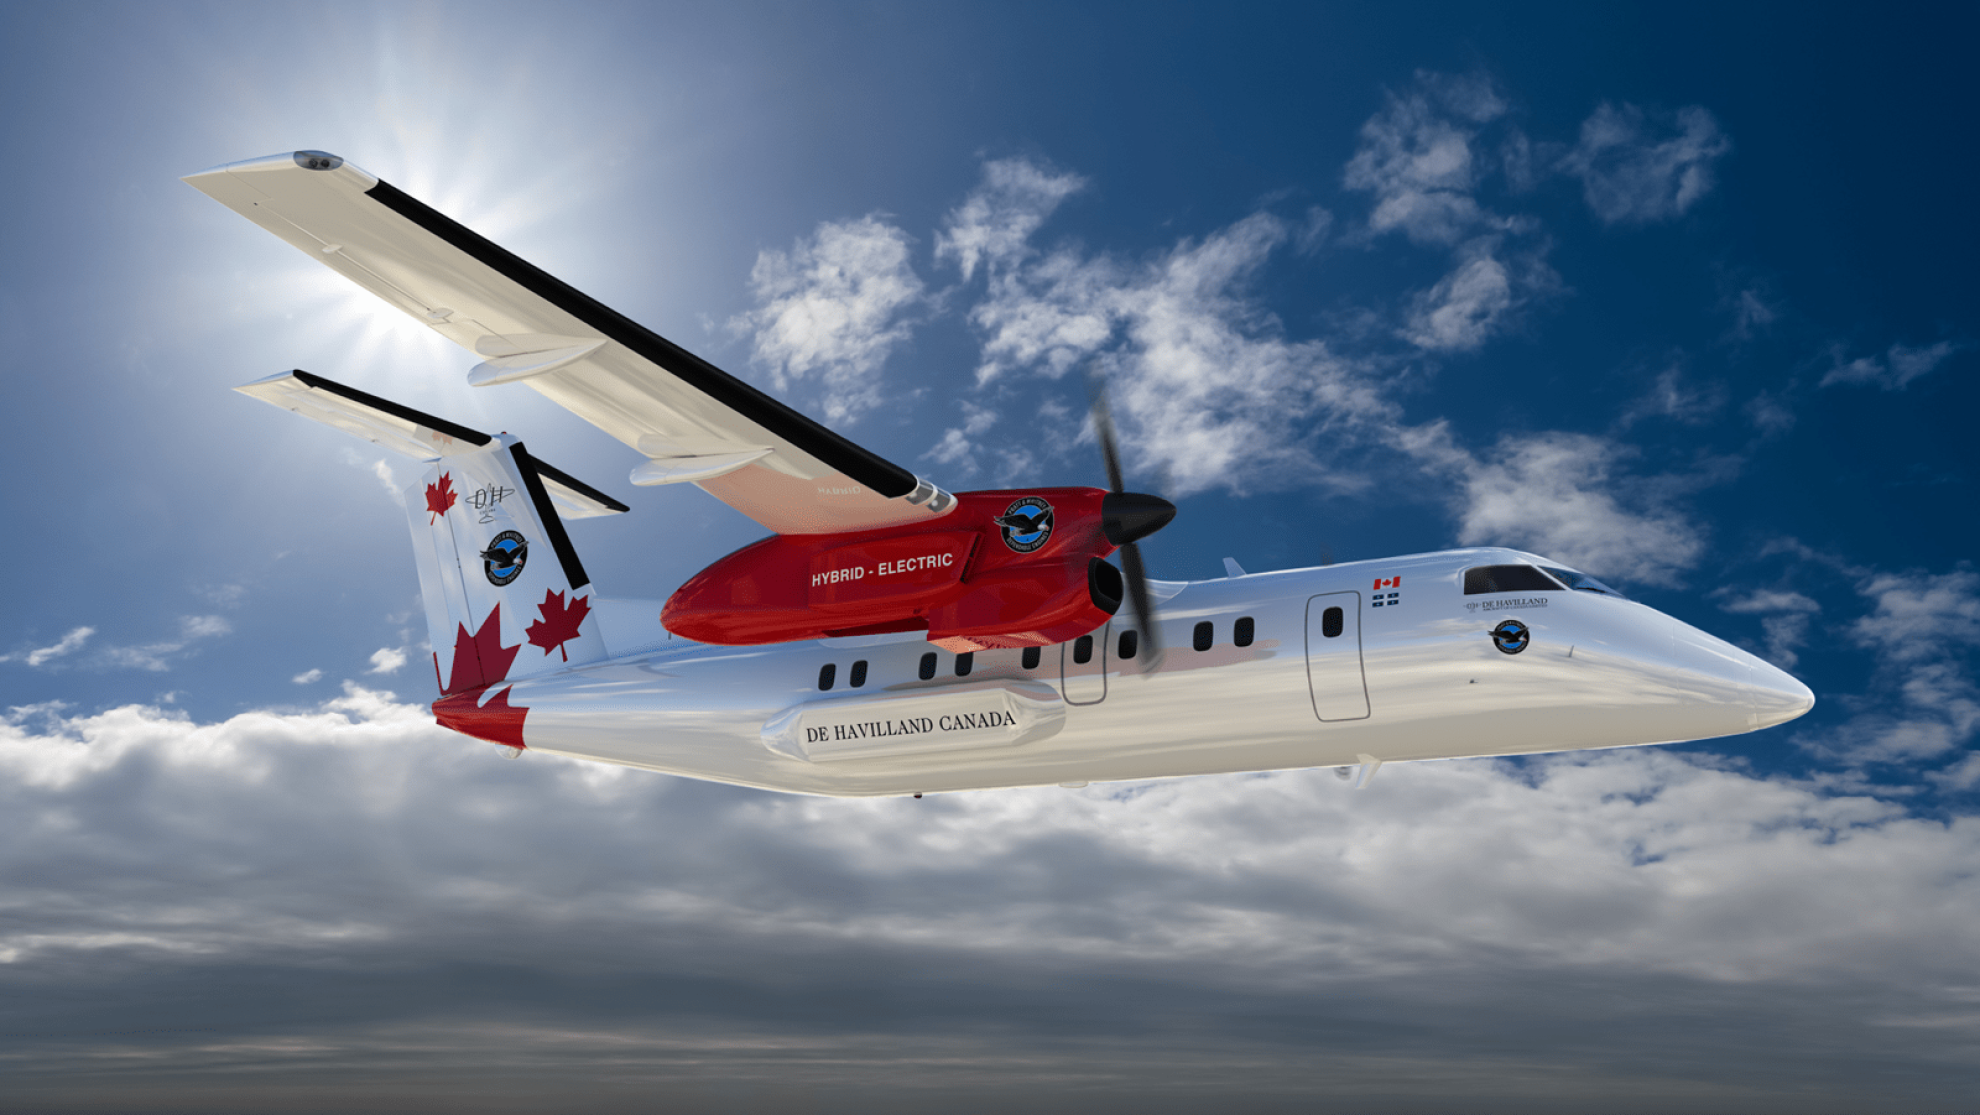 H55 is supplying battery systems for the regional hybrid-electric flight demonstrator programme of Pratt & Whitney in Canada. 